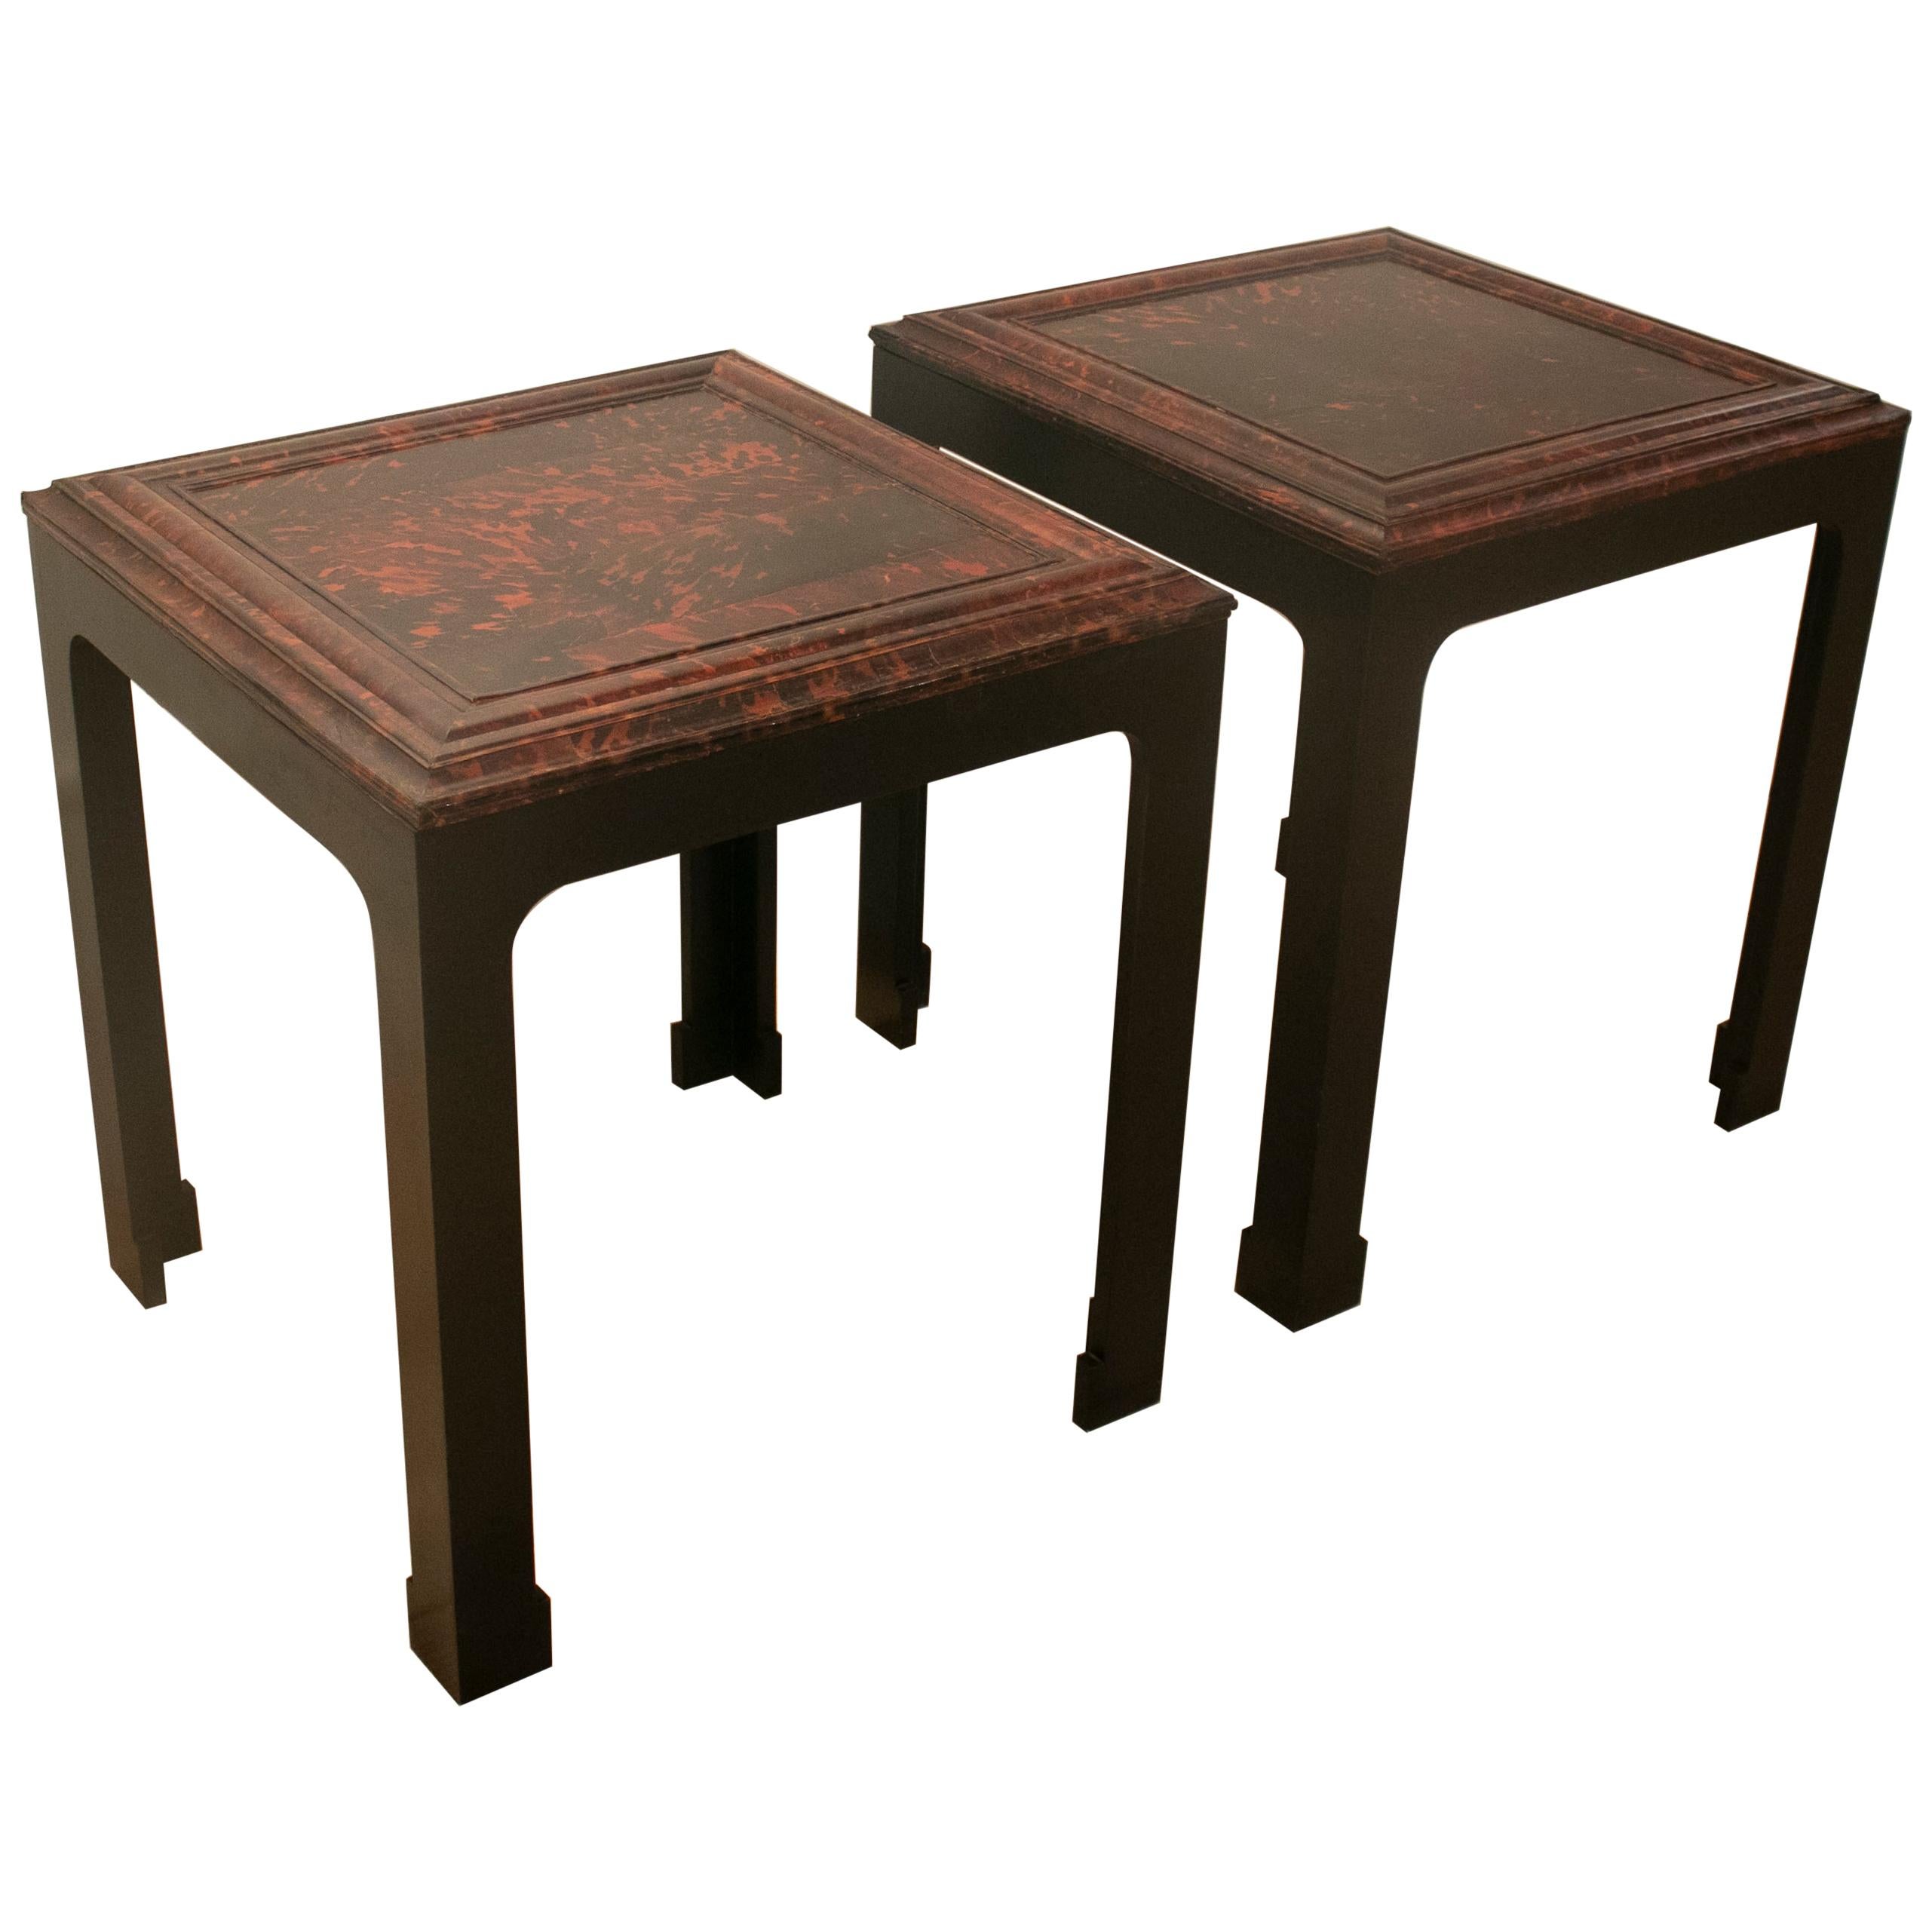 1930s French Pair of Carey Tortoise Shell Side Tables